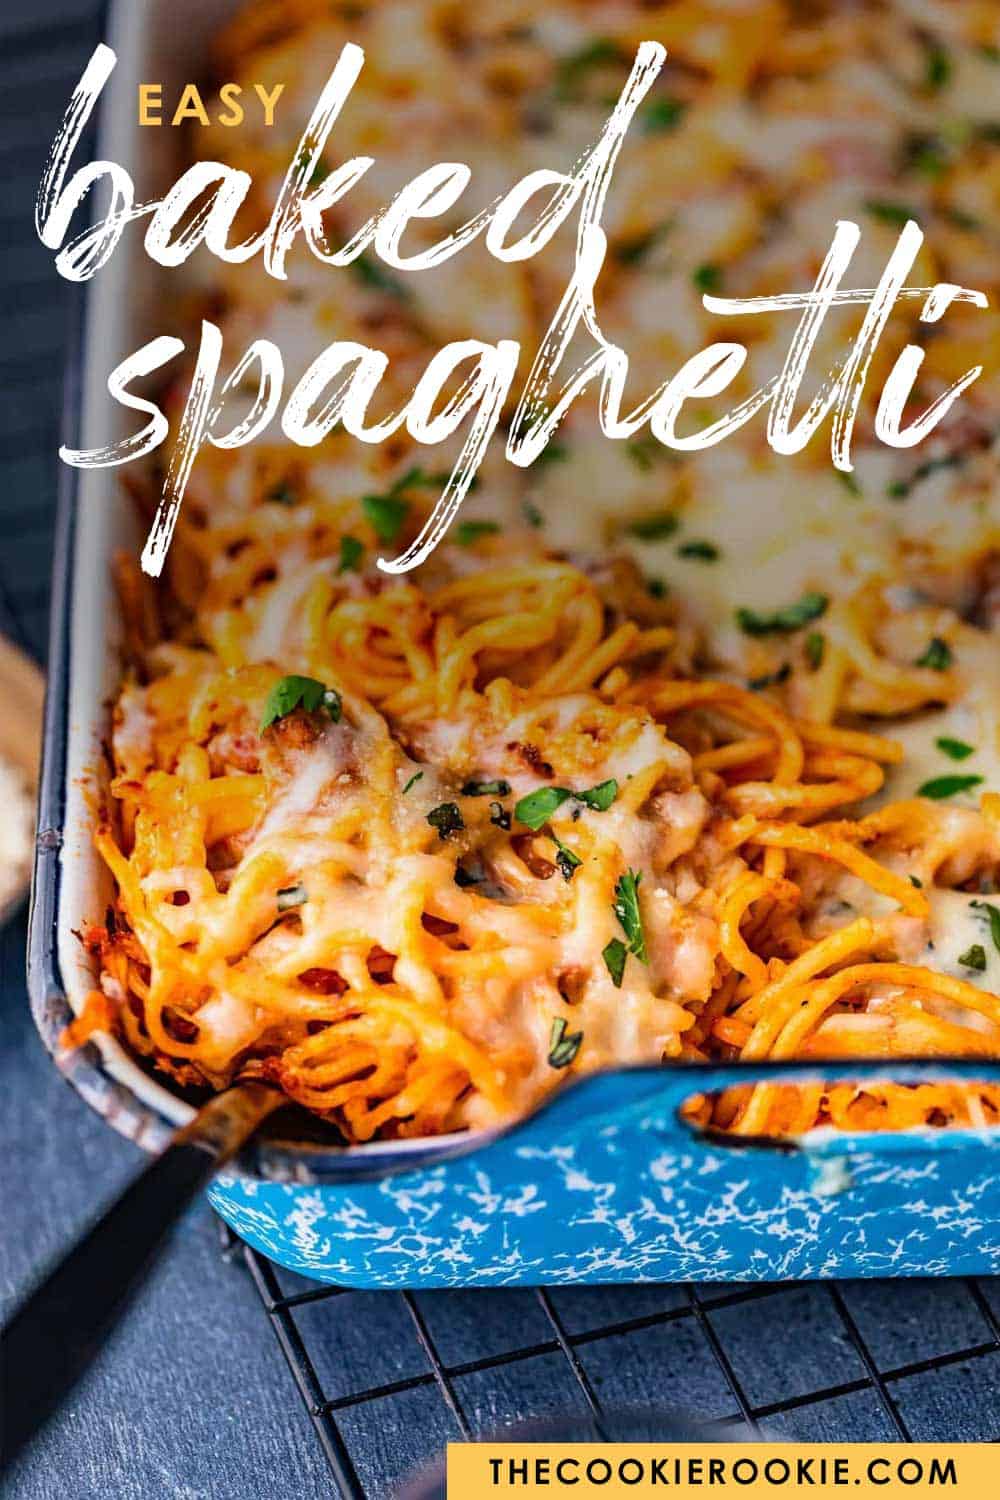 Baked Spaghetti Recipe - The Cookie Rookie® (VIDEO!!)